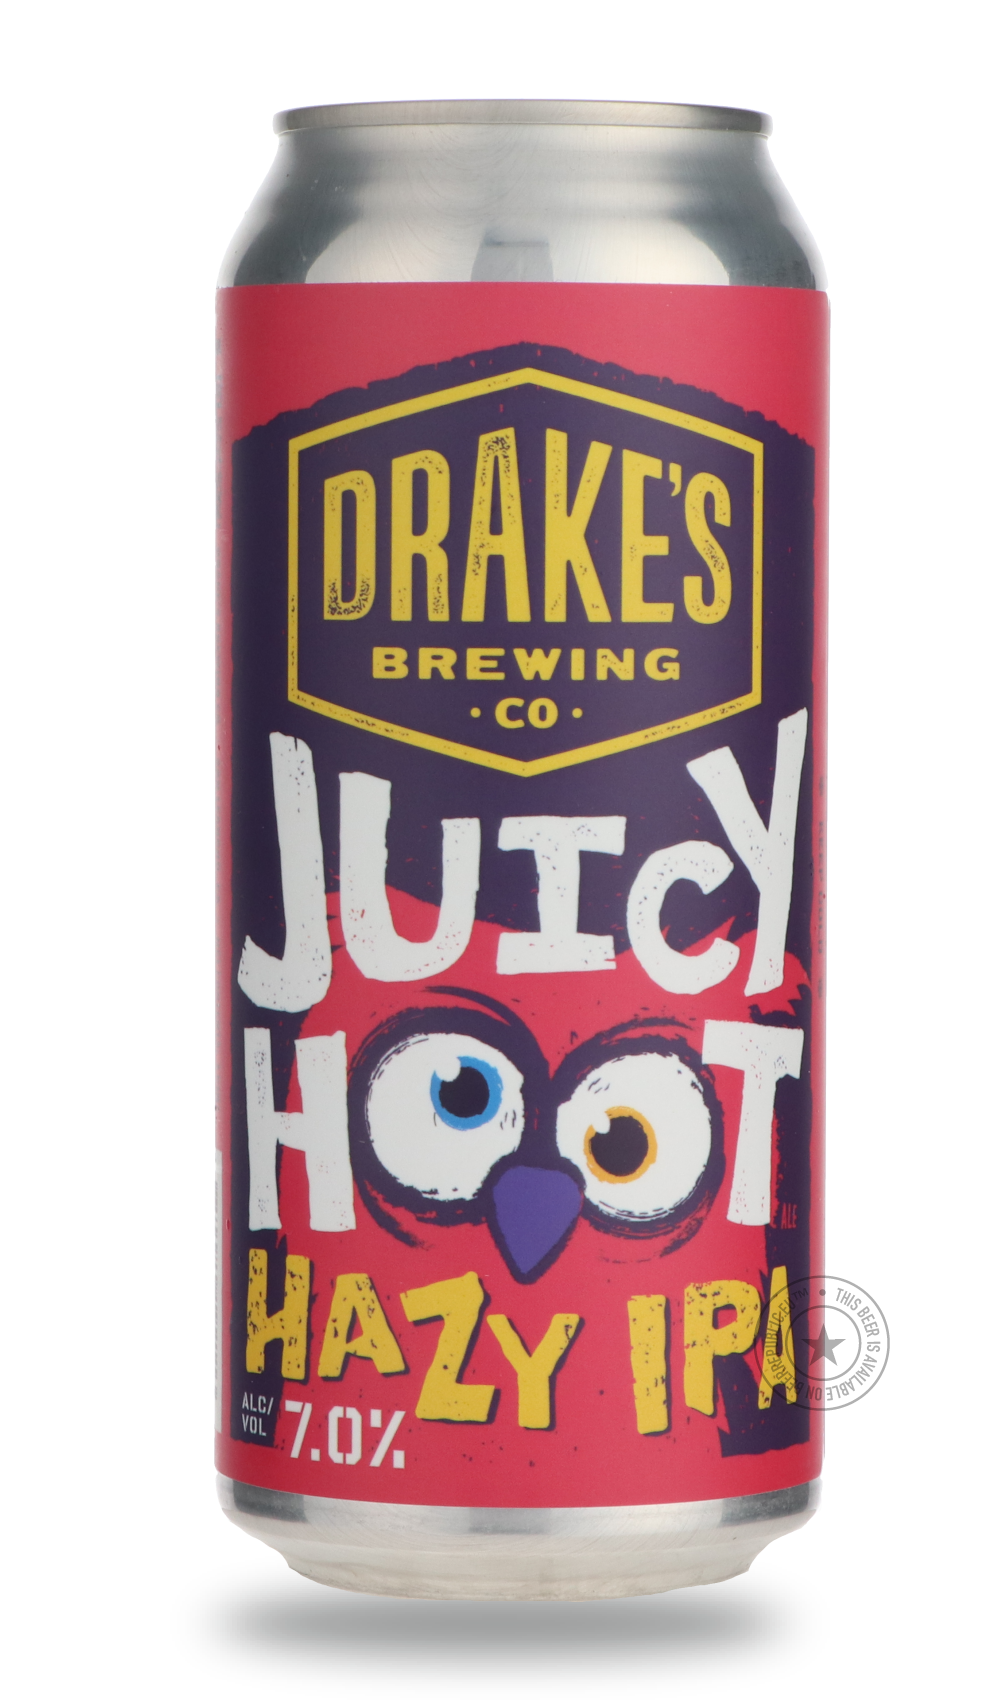 -Drake's- Juicy Hoot-IPA- Only @ Beer Republic - The best online beer store for American & Canadian craft beer - Buy beer online from the USA and Canada - Bier online kopen - Amerikaans bier kopen - Craft beer store - Craft beer kopen - Amerikanisch bier kaufen - Bier online kaufen - Acheter biere online - IPA - Stout - Porter - New England IPA - Hazy IPA - Imperial Stout - Barrel Aged - Barrel Aged Imperial Stout - Brown - Dark beer - Blond - Blonde - Pilsner - Lager - Wheat - Weizen - Amber - Barley Wine 